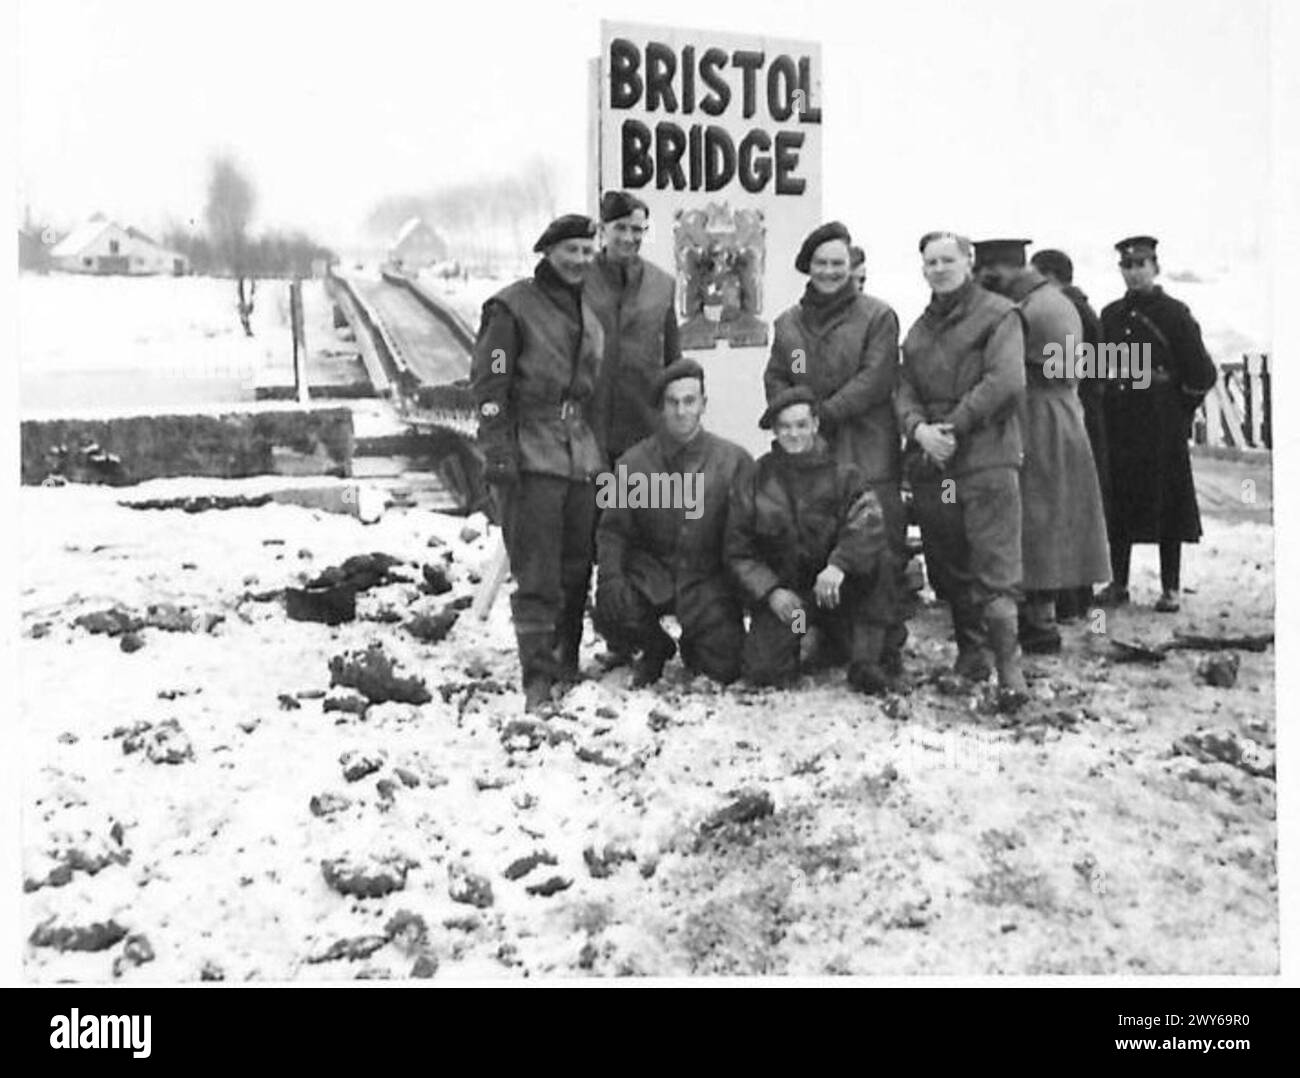 BRISTOL BRIDGE - The men from Bristol who built the Bristol Bridge stand by their finished job, L-R:- CSM Vowles of 14 Platts Hill, Kenysham Sjt D. Ricks of 190a Cranbrooke Road, Reland, Bristol 6 Sjt Greenslade of 3 Sandringham Avenue, Bristol Dcr J. T. Hunt of 26 Millington Brook Ave, Bristol 4 Spr K.J. Amery of 43 Bullen Road, Bristol Cpl E. James of 47 Weave St. Bristol 3 Ten minutes after the job was completed, the first supply column crossed the bridge on its way to the front. , British Army, 21st Army Group Stock Photo